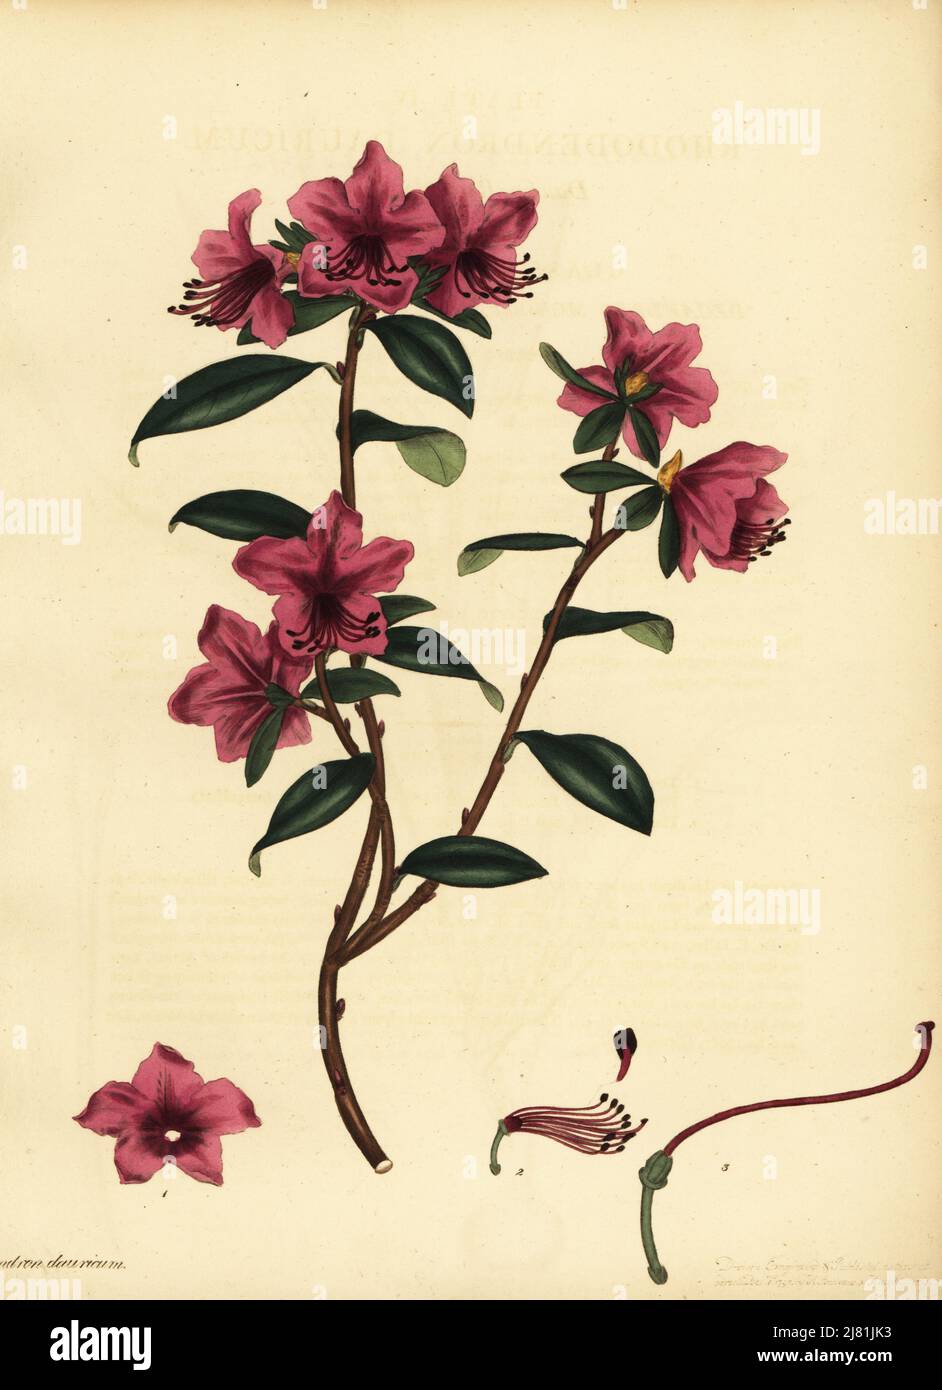 Siberian rhododendron, Rhododendron dauricum. Dauric rhododendron. Copperplate engraving drawn, engraved and hand-coloured by Henry Andrews from his Botanical Register, Volume 1, published in London, 1799. Stock Photo